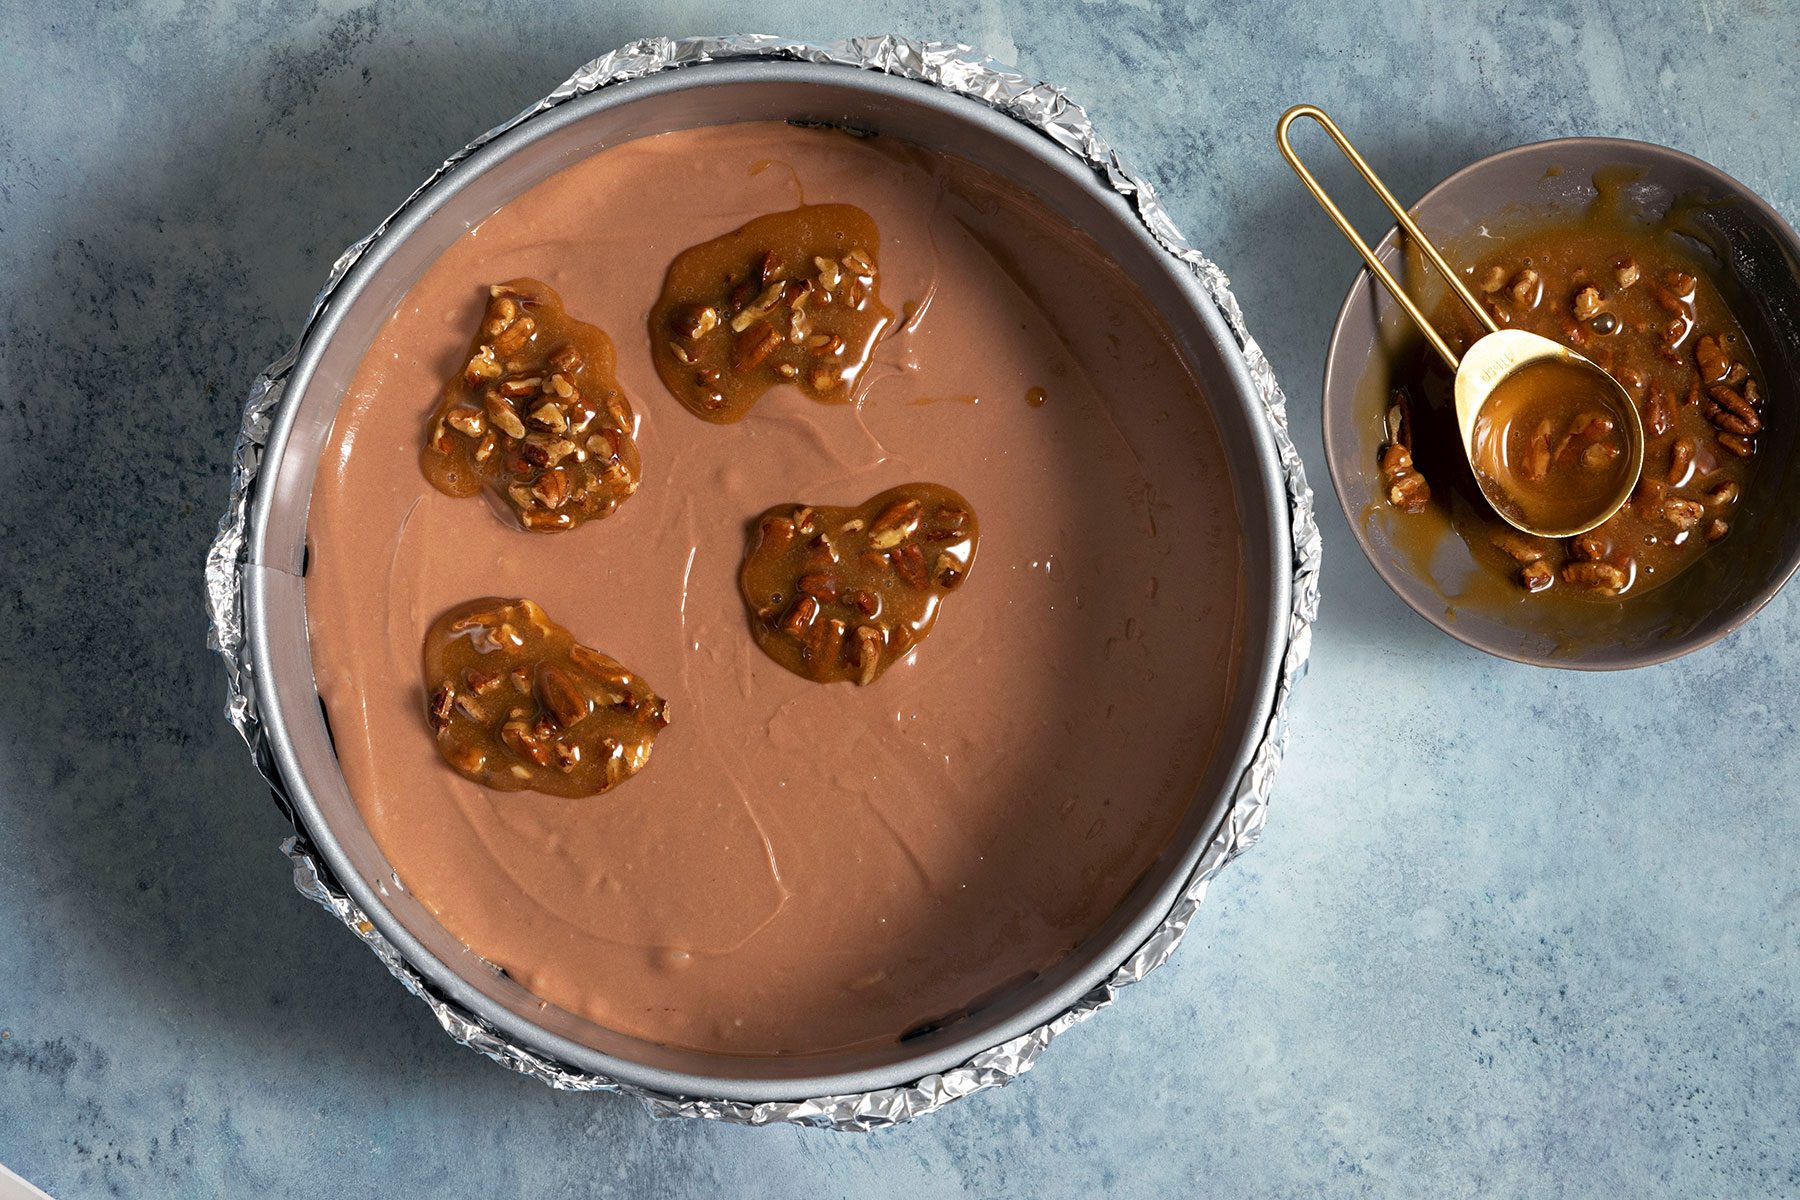 Spoonful of pecans mixed with caramel dropped on melted chocolate mixture in baking tray